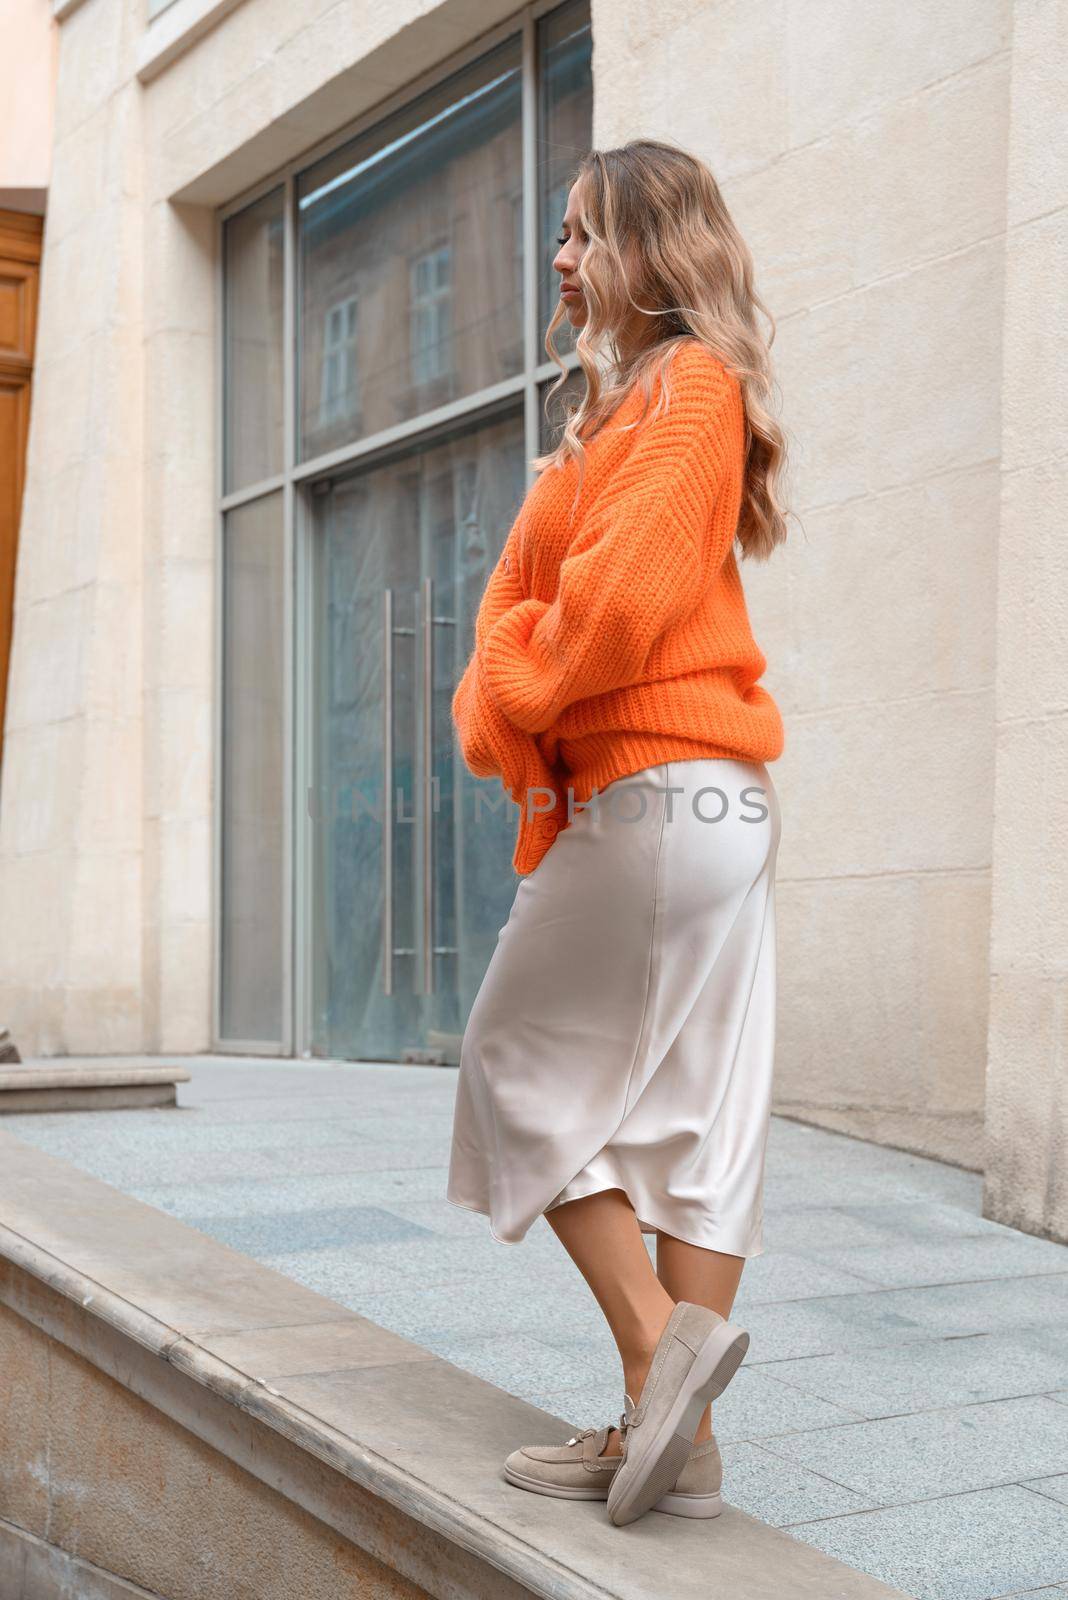 Portrait of fashionable blond women in orange sweater, beige dress and stylish suede loafer shoes posing in the street